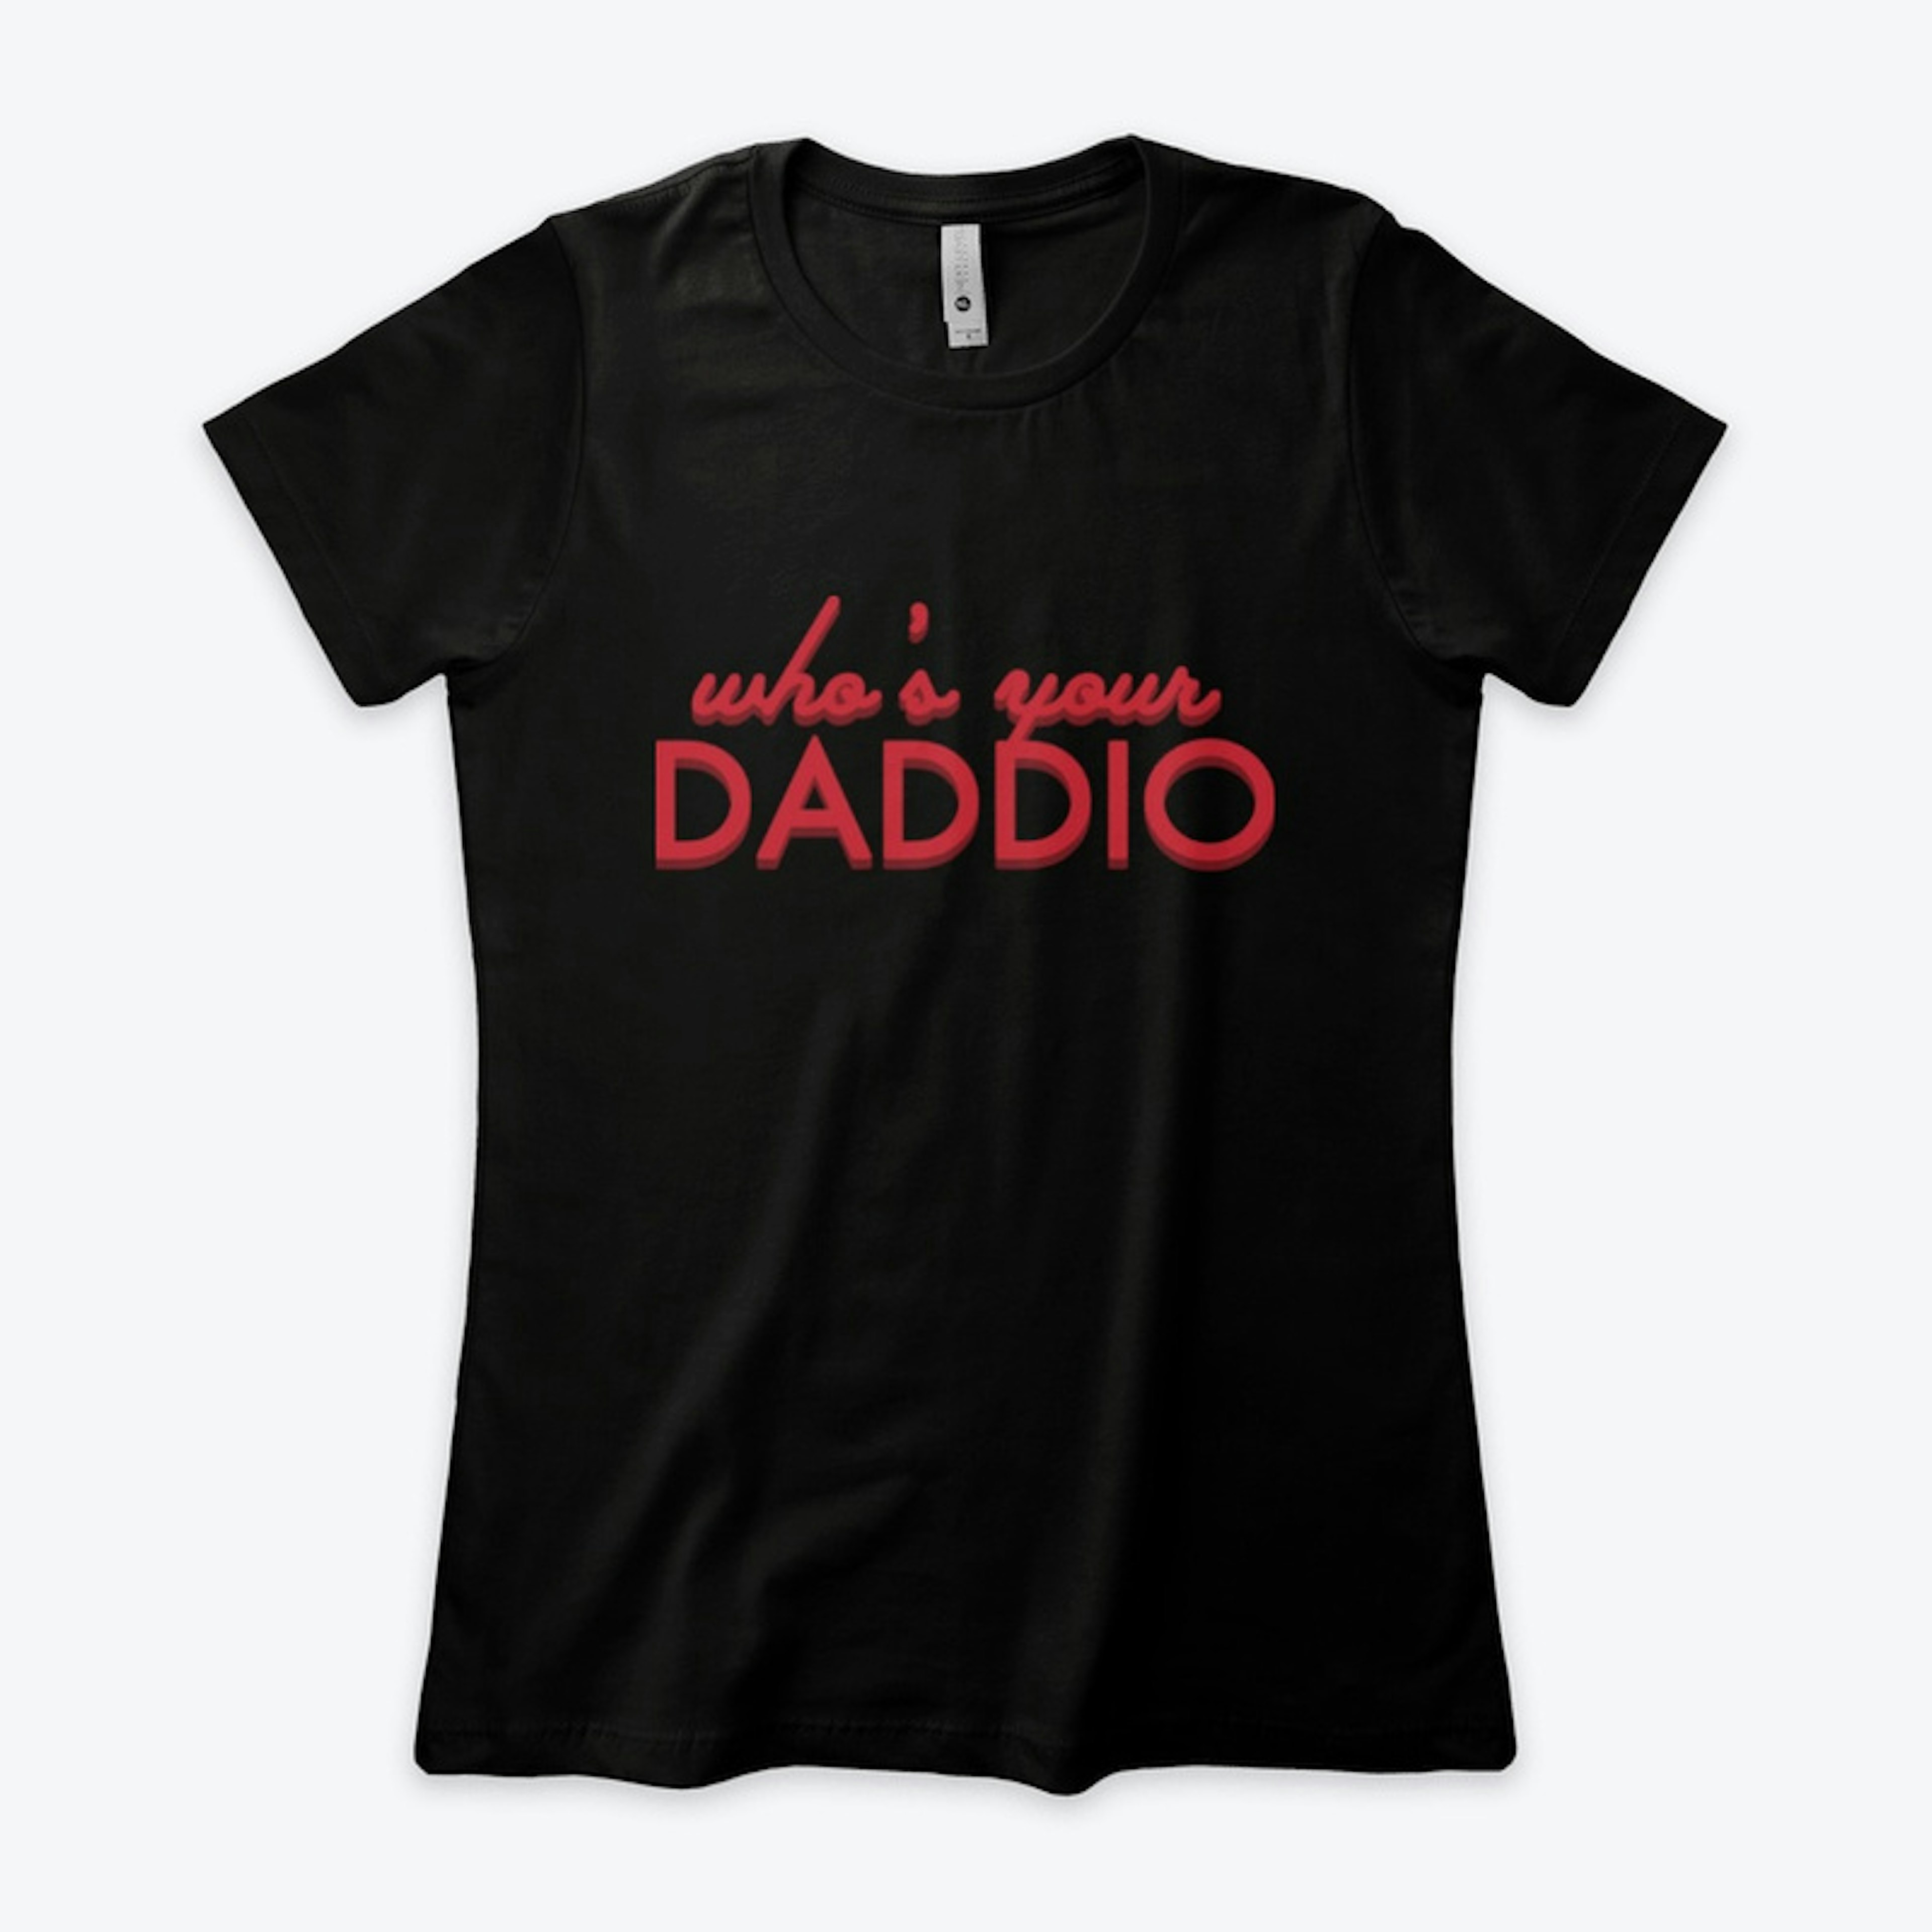 Who's Your Daddio?